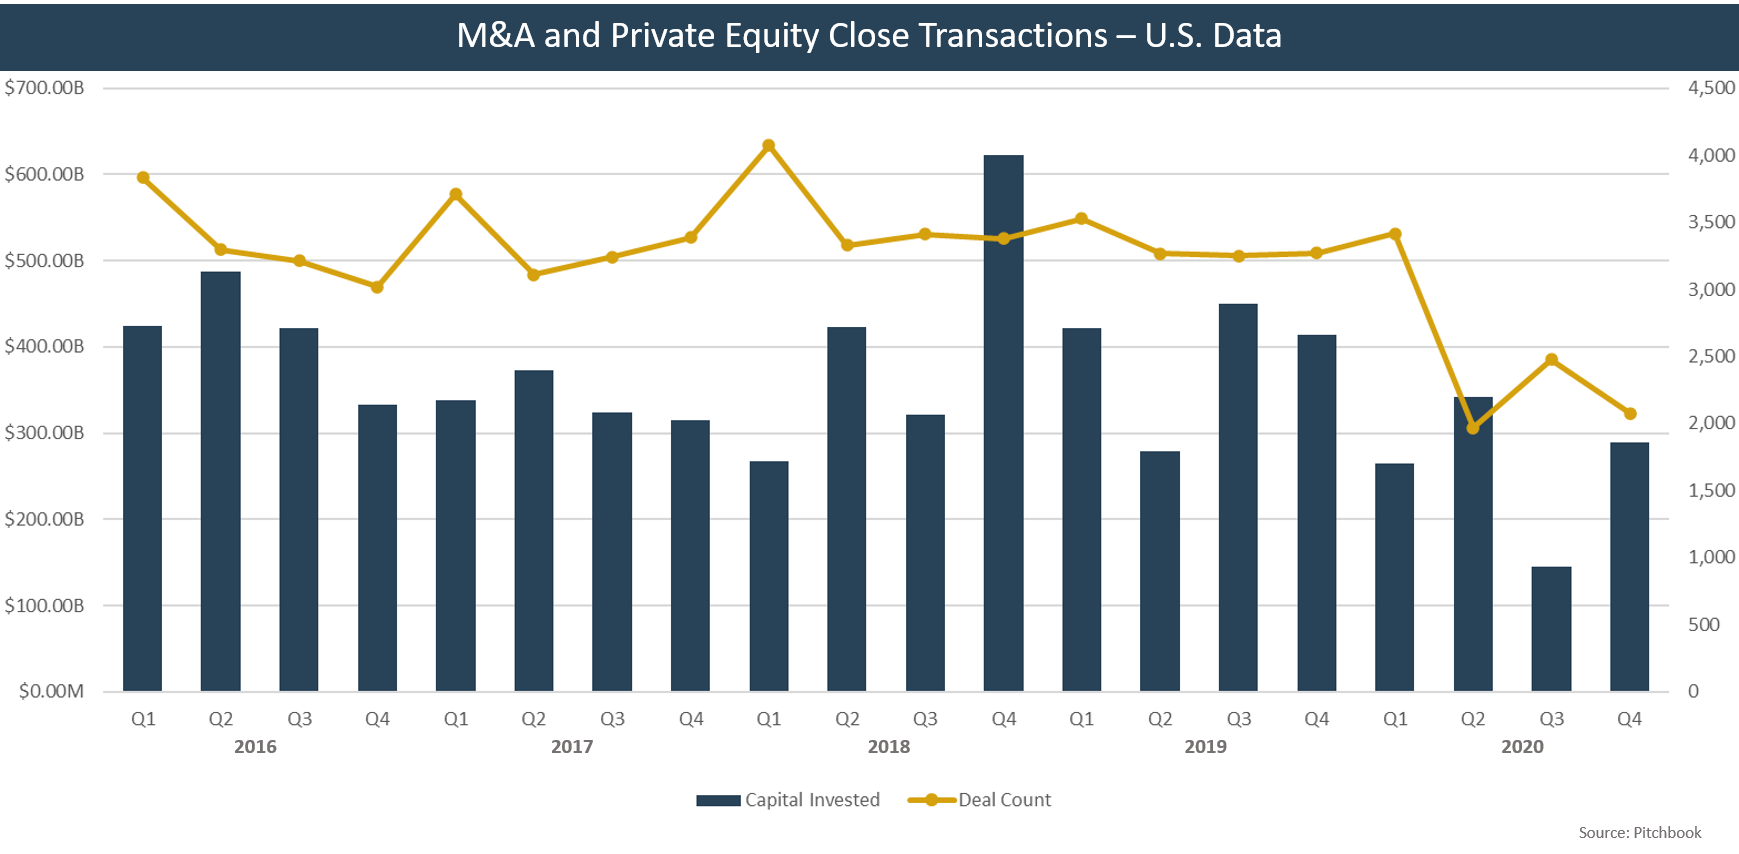 M&A and Private Equity Close Transactions